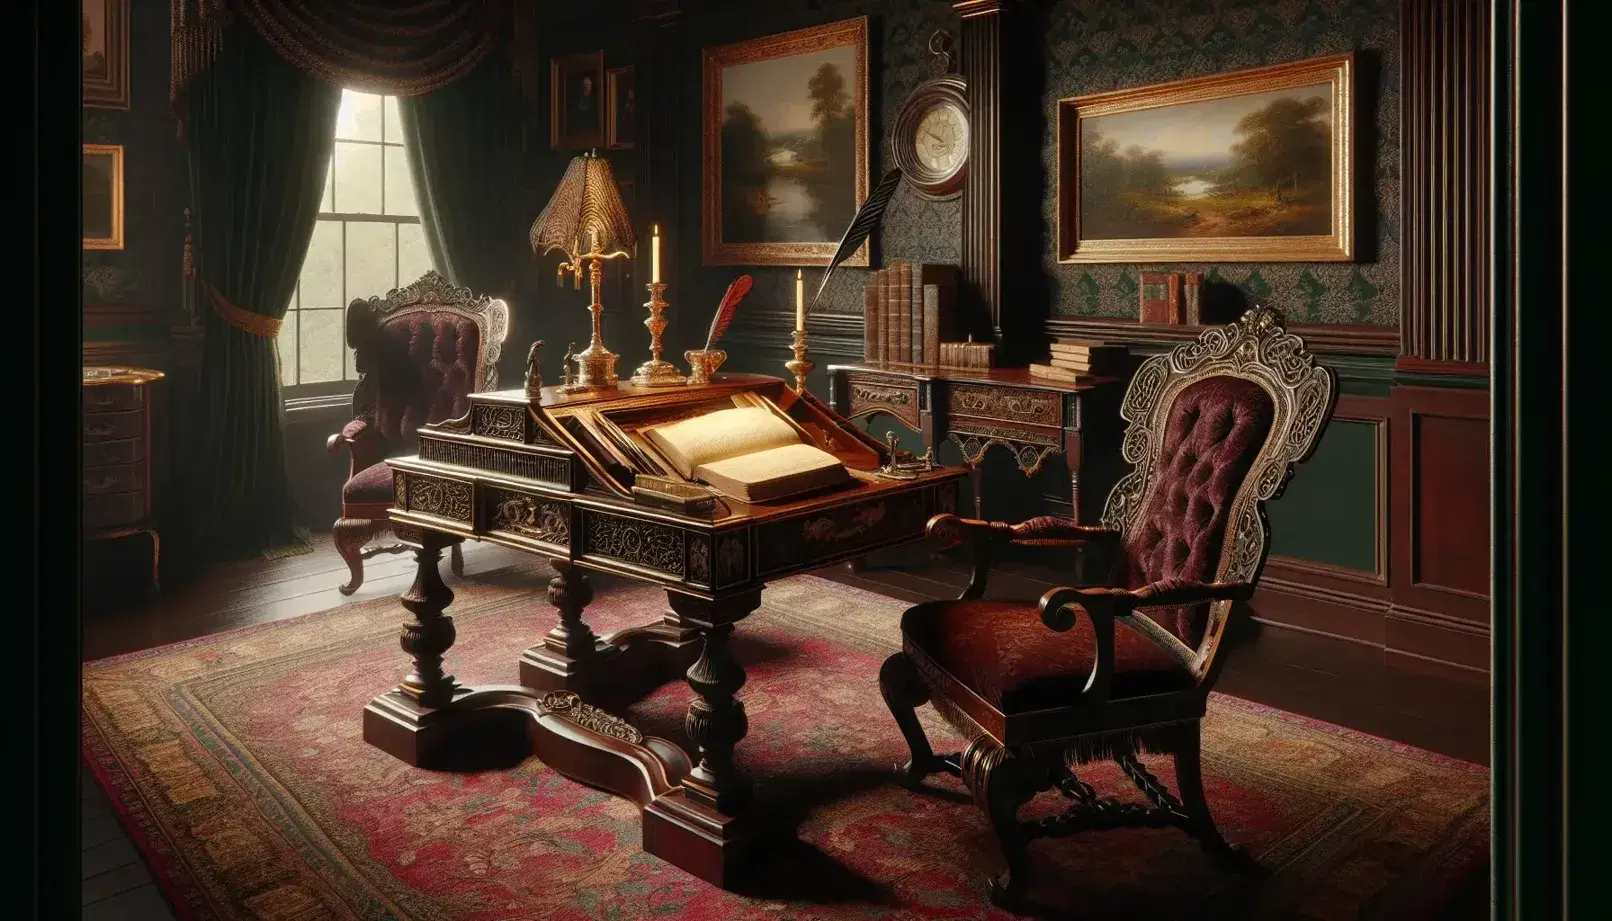 Late 19th-century Gilded Age drawing room with ornate wooden desk, red upholstered chairs, open book with quill, and gold pocket watch.